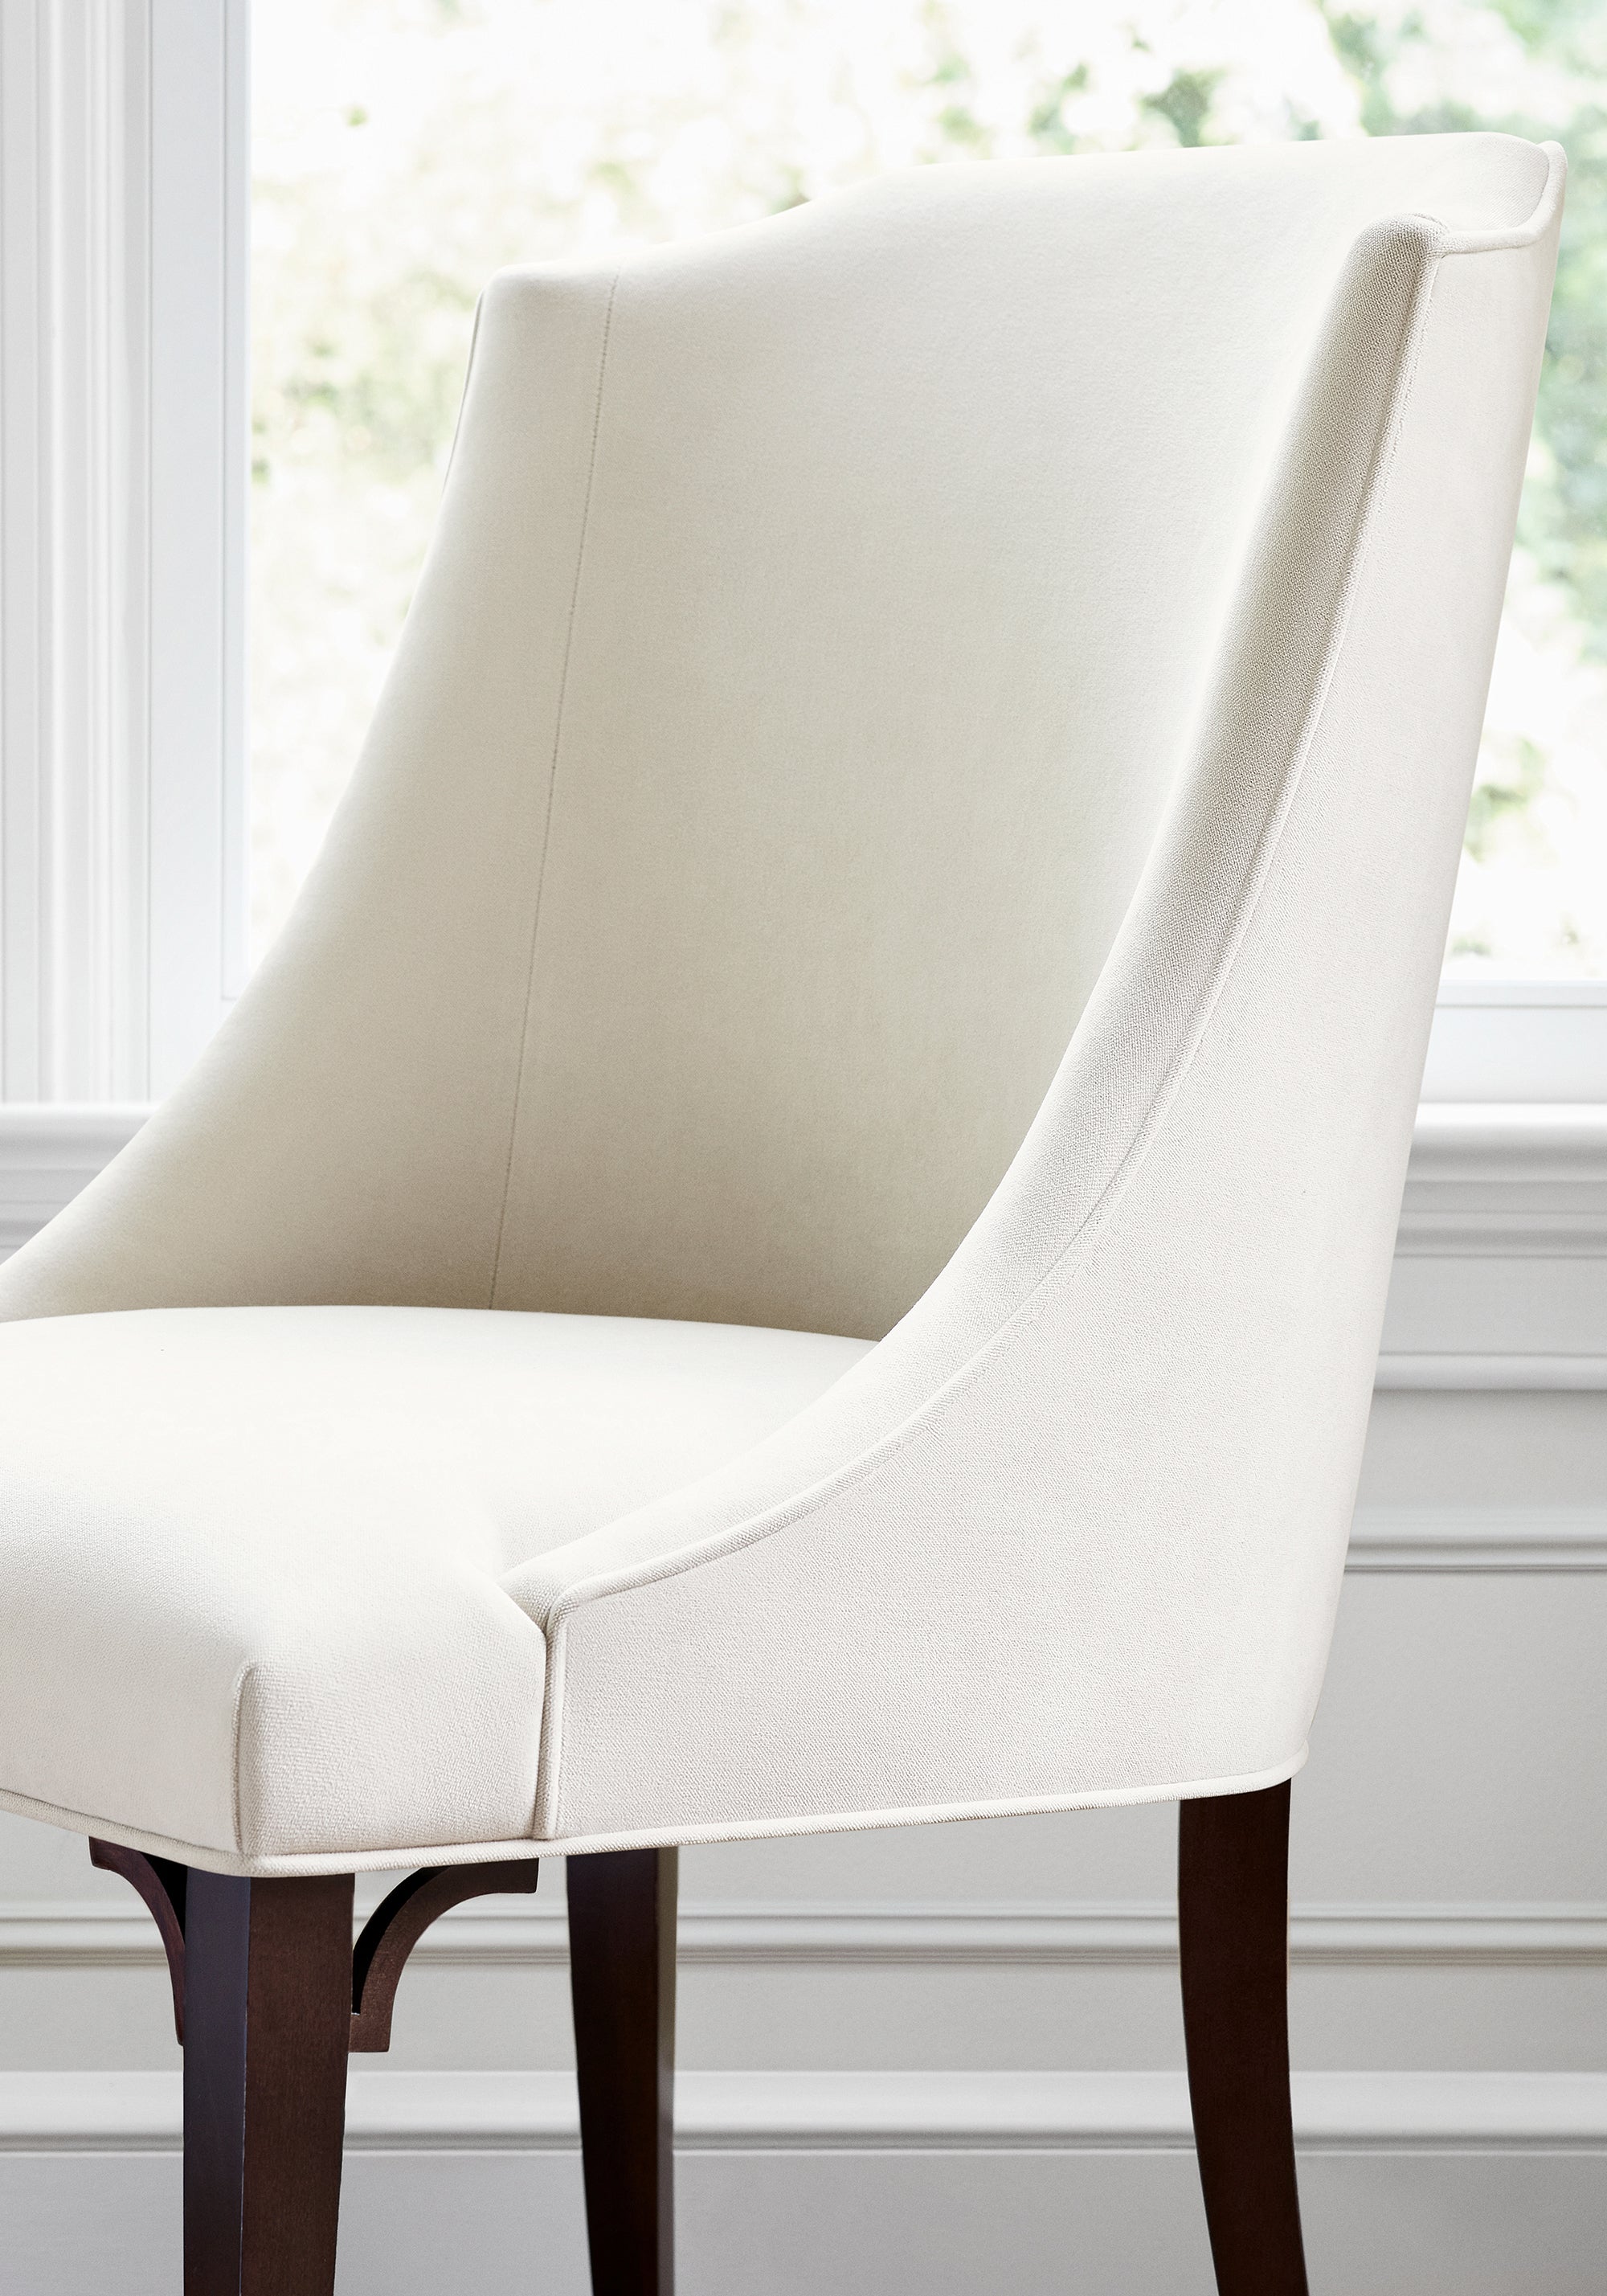 Detailed view of Bailey Dining chair in Club Velvet sustainable woven fabric in parchment color variant by Thibaut in the Club Velvet collection - pattern number W7232